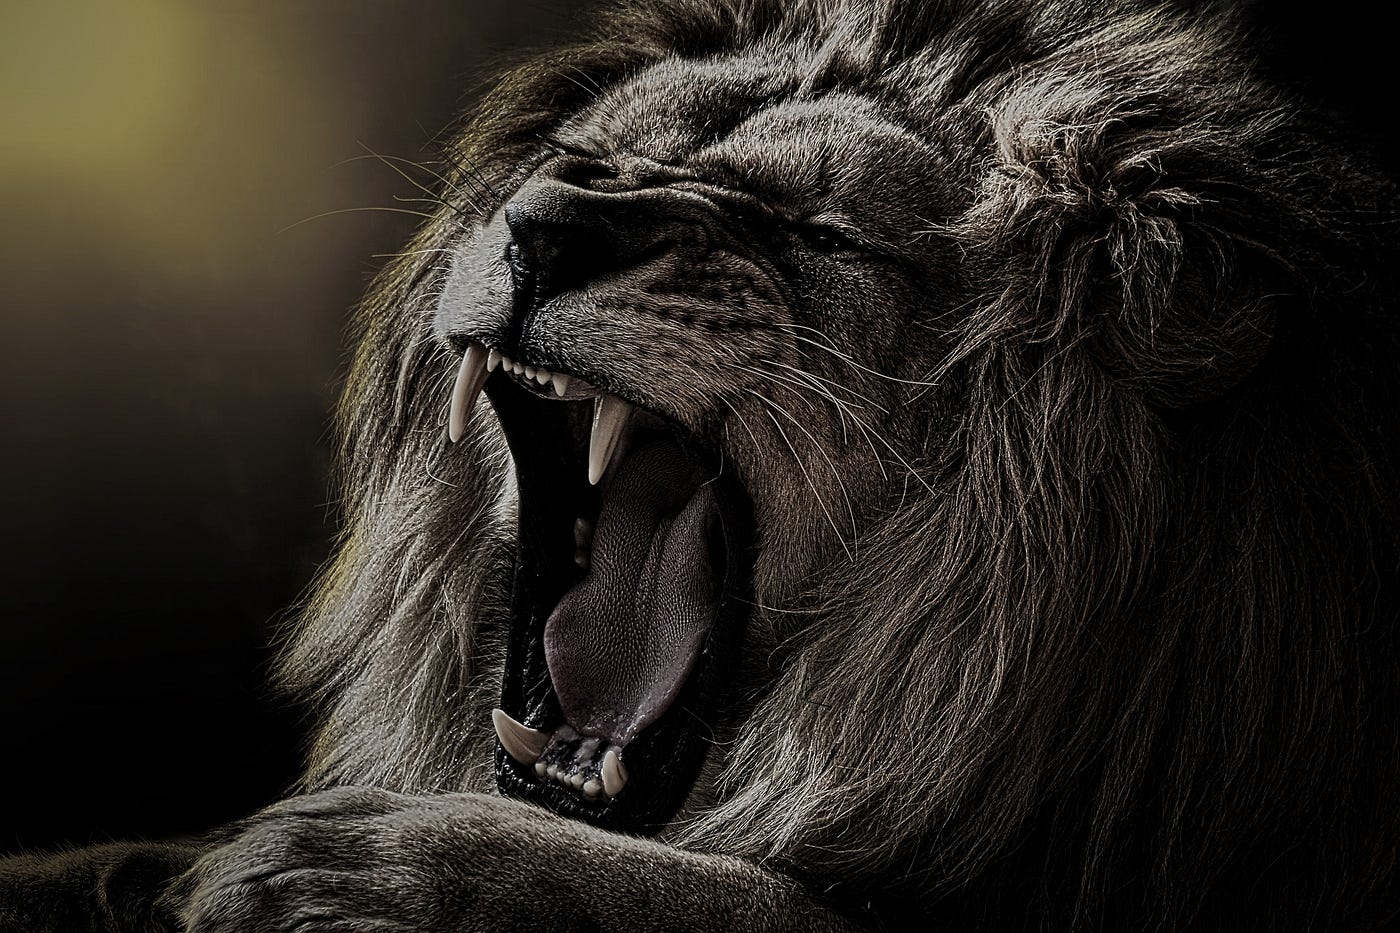 The Lion's Roar - Facing Your Fears